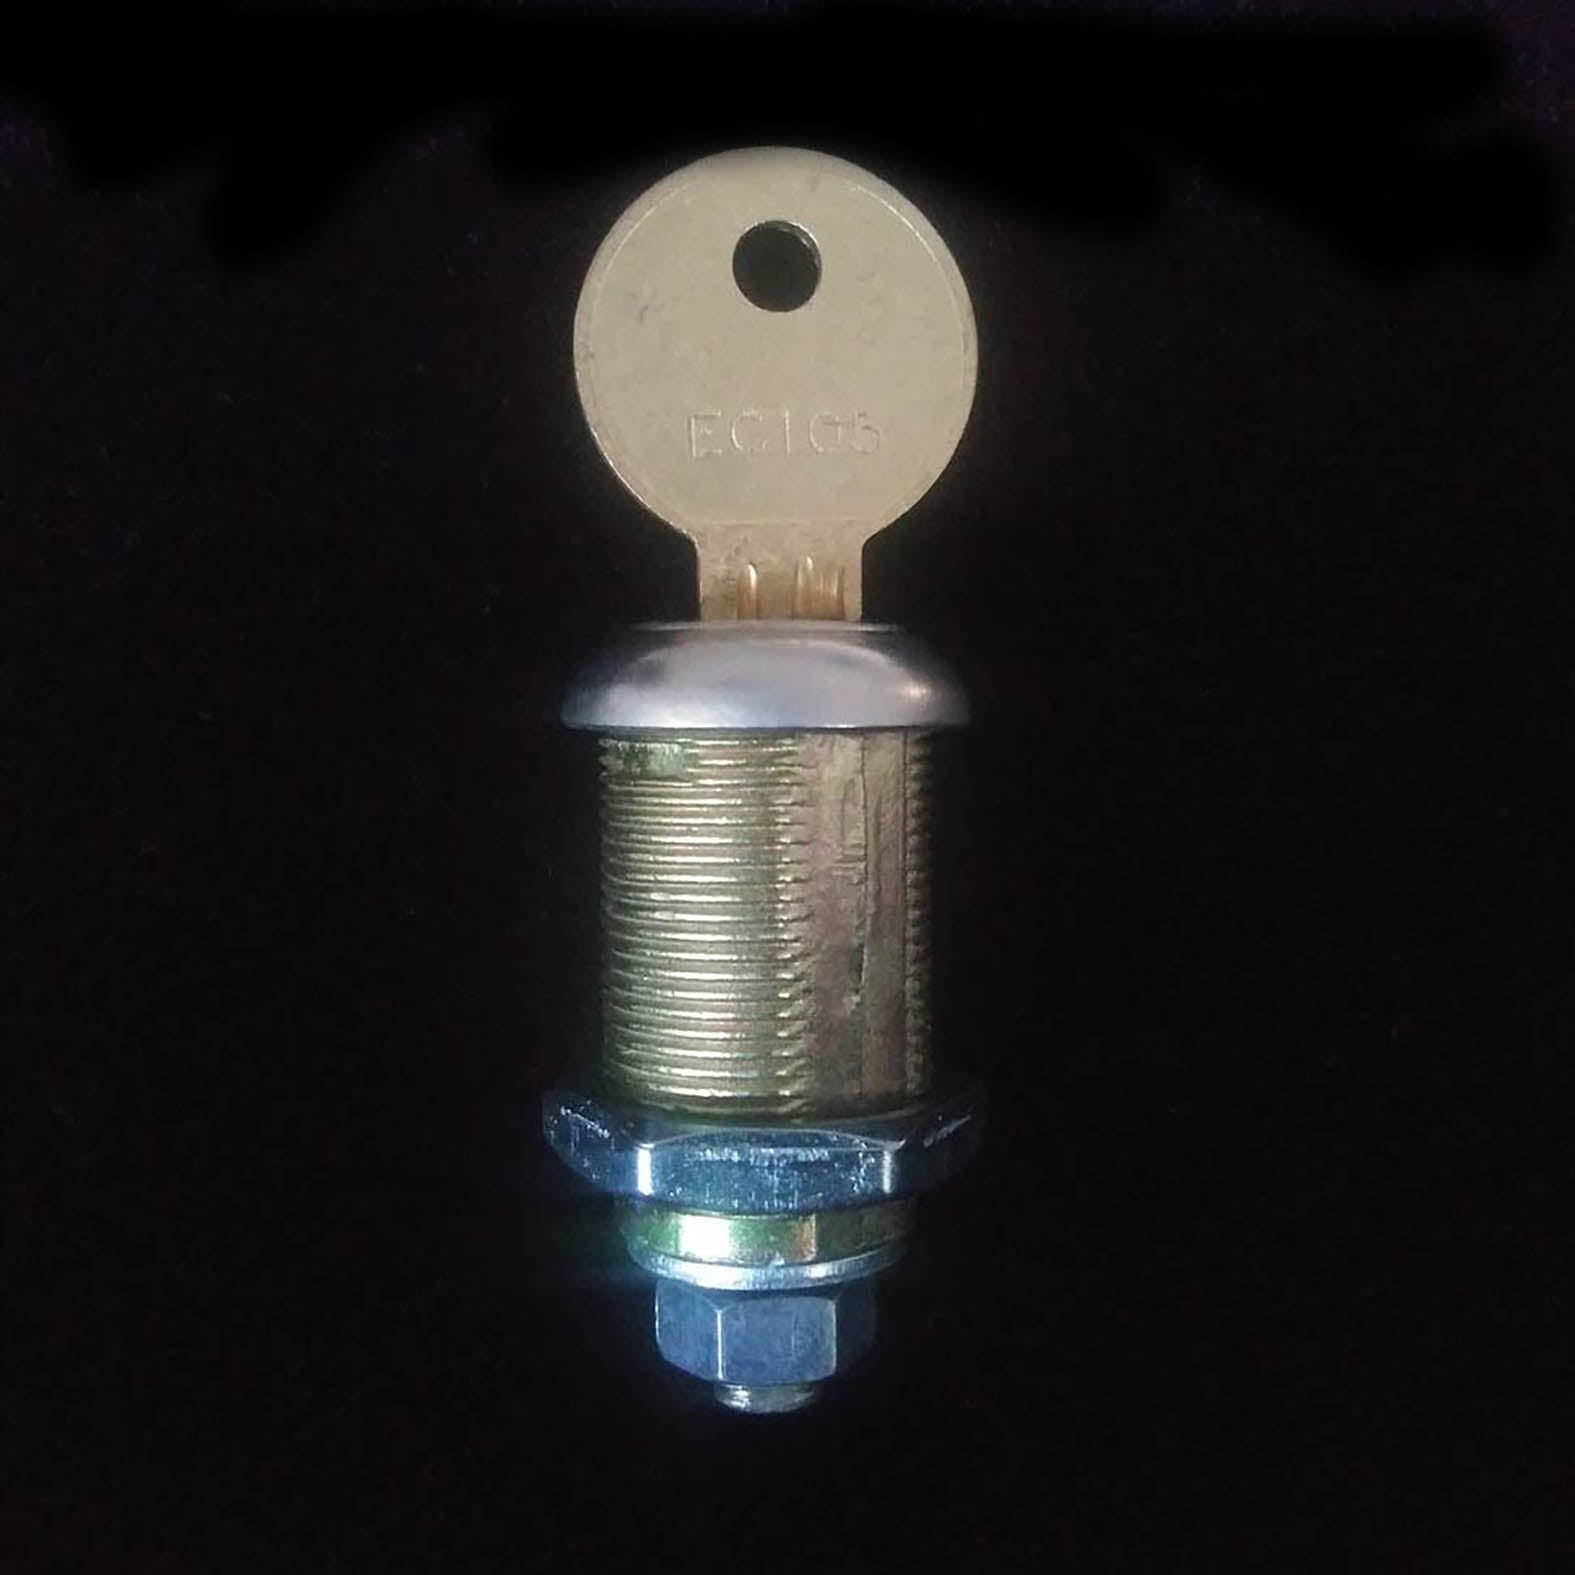 EC-105 Key For Rock-Ola Retro CD4 and CD8 Bubbler Jukeboxes Made By Gkeez 